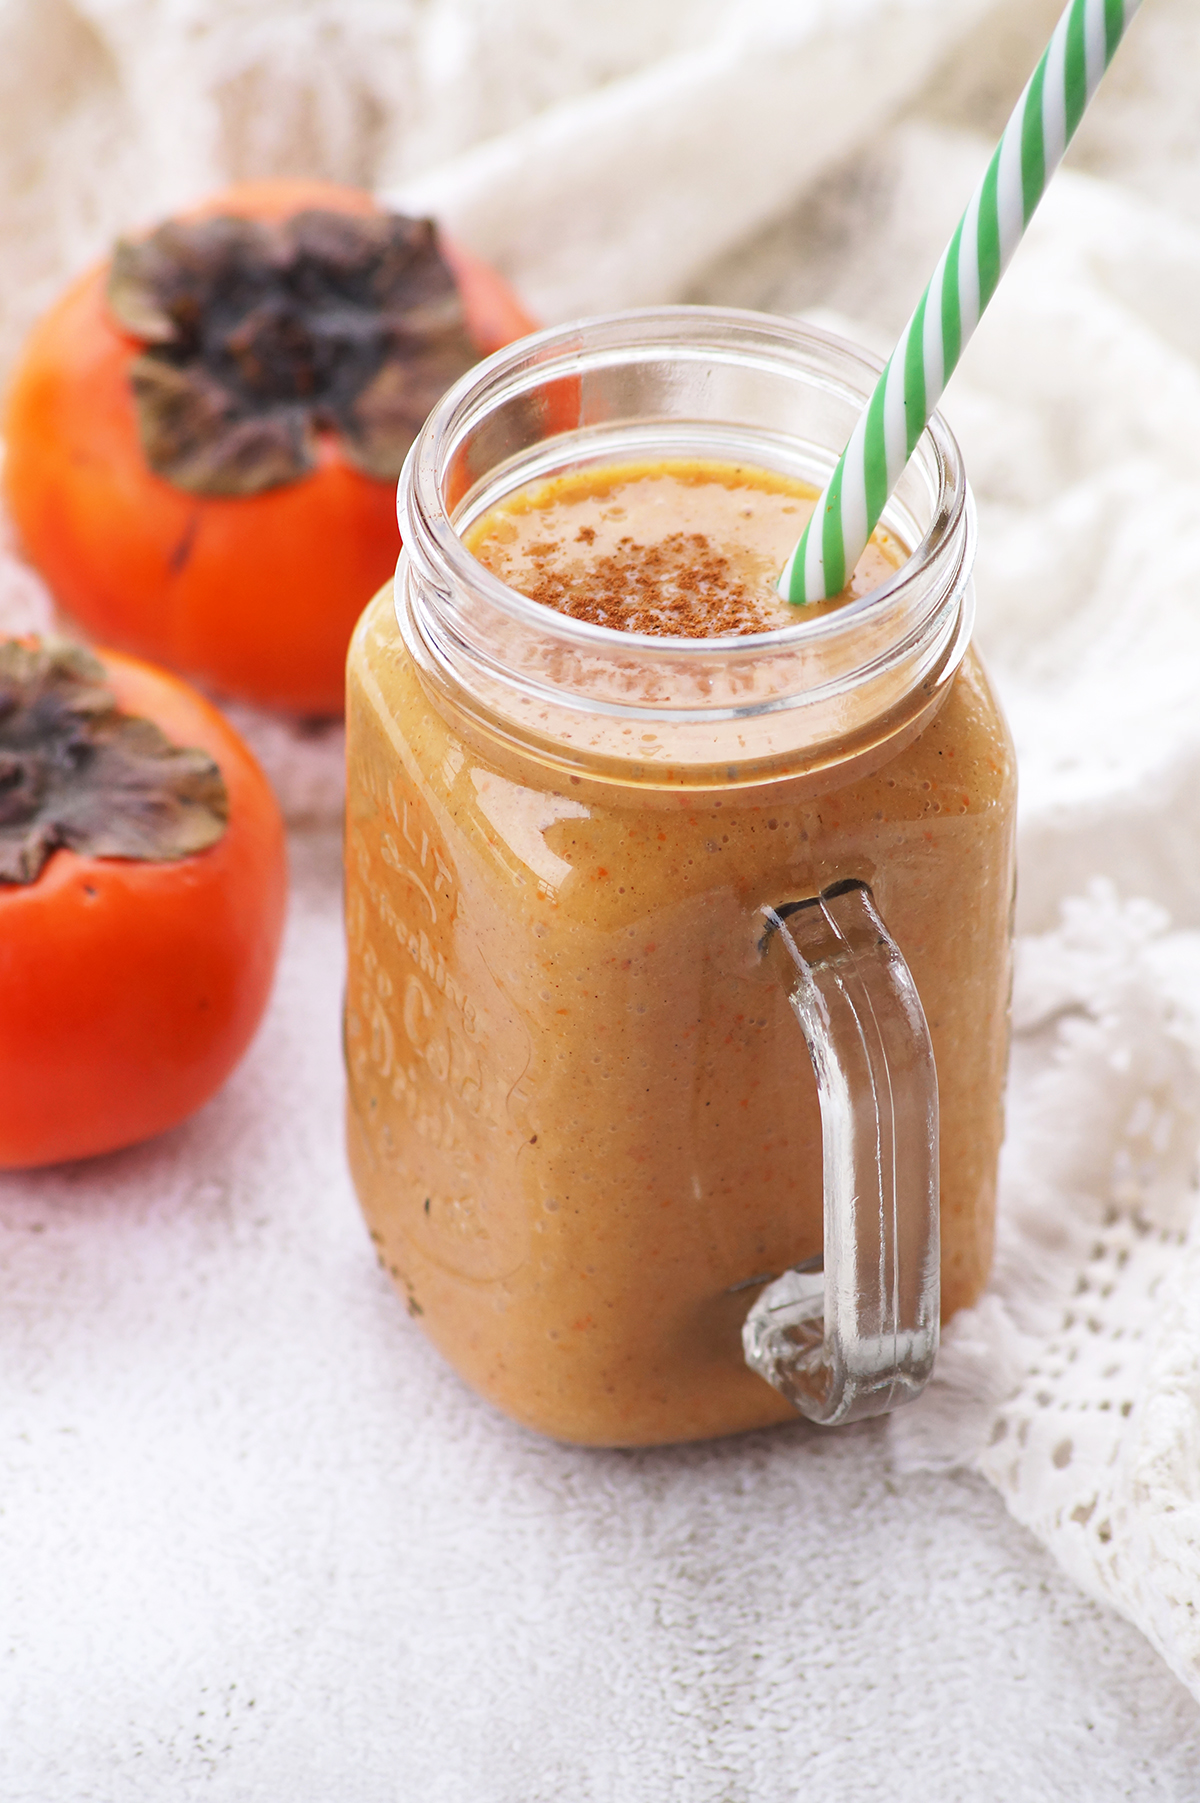 a glass jar full of persimmon smoothie, topped with cinnamon